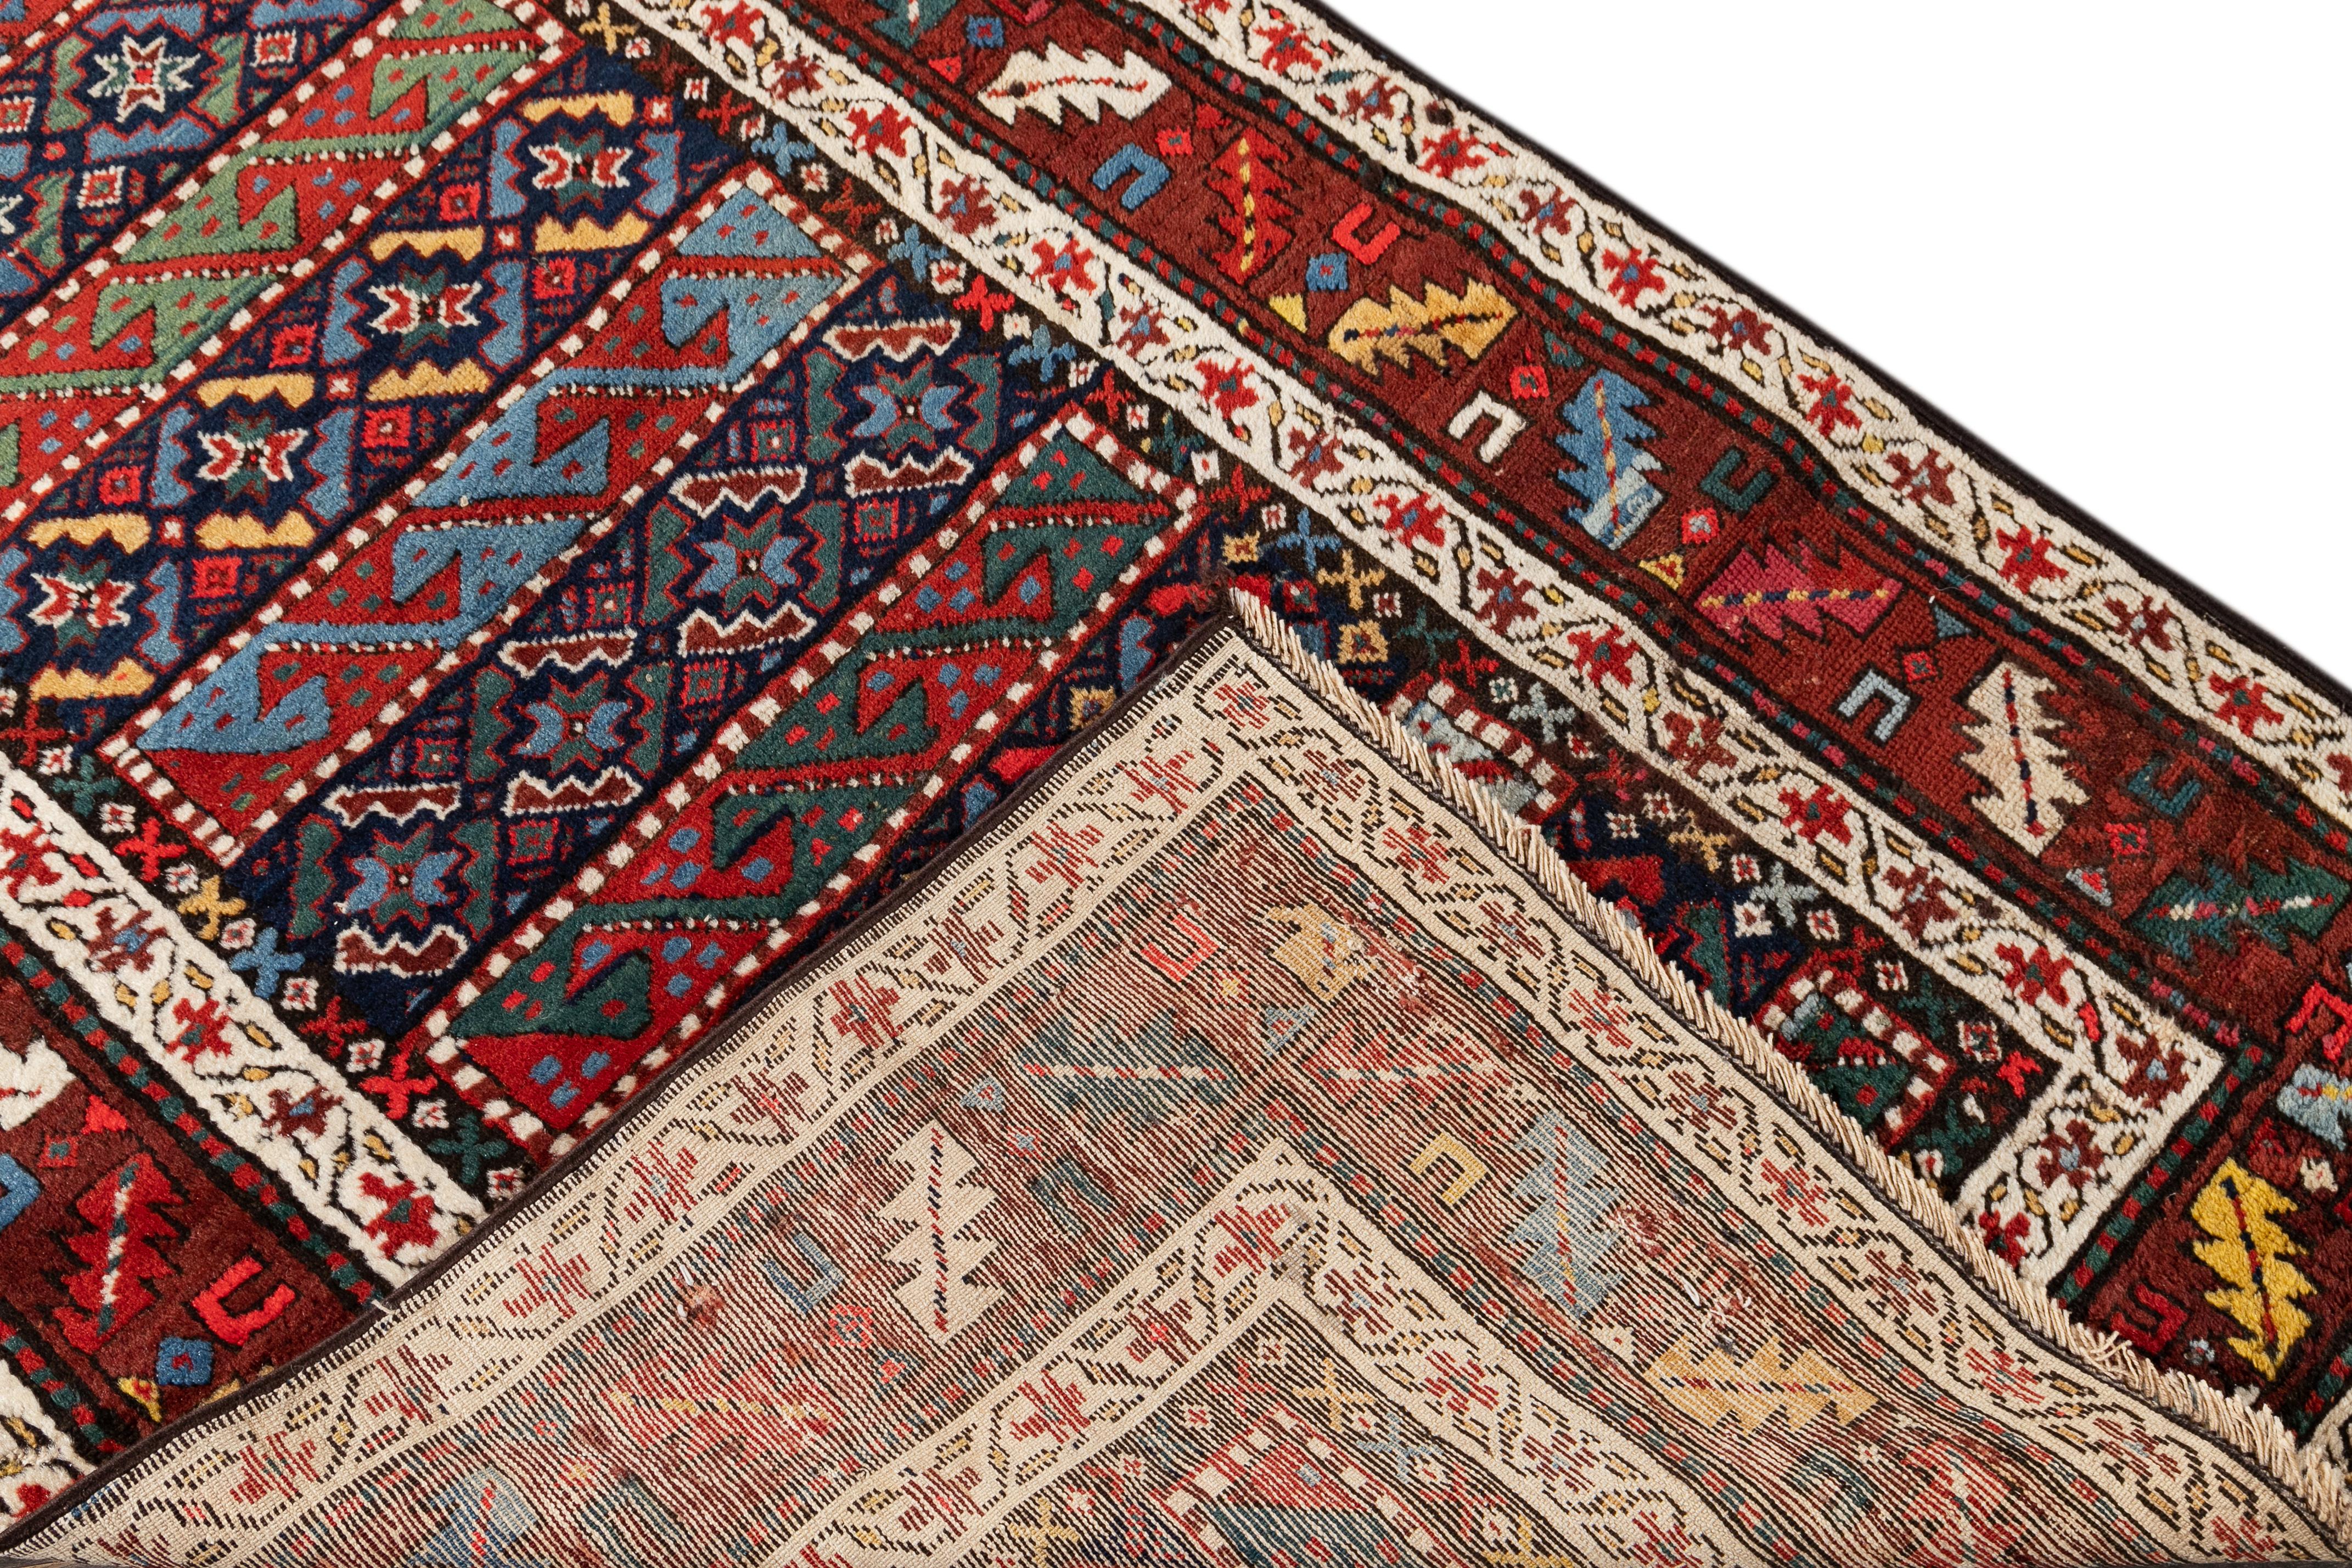 Beautiful antique Kazak hand-knotted wool runner with a red field, blue and ivory accents in a gorgeous all-over geometric design.



This rug measures: 3'9